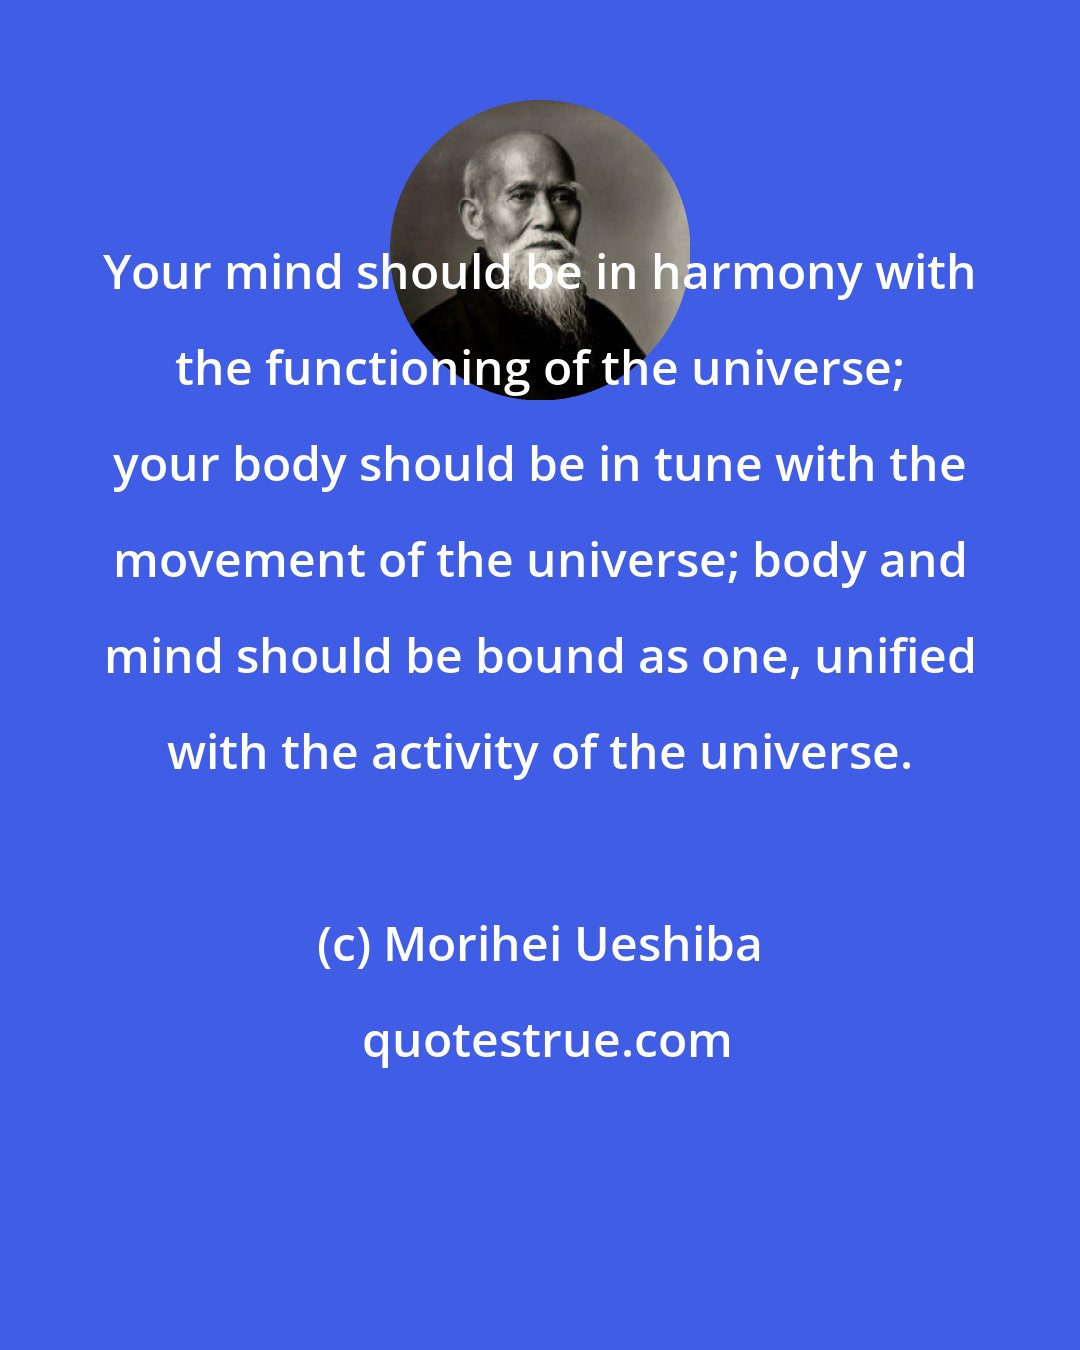 Morihei Ueshiba: Your mind should be in harmony with the functioning of the universe; your body should be in tune with the movement of the universe; body and mind should be bound as one, unified with the activity of the universe.